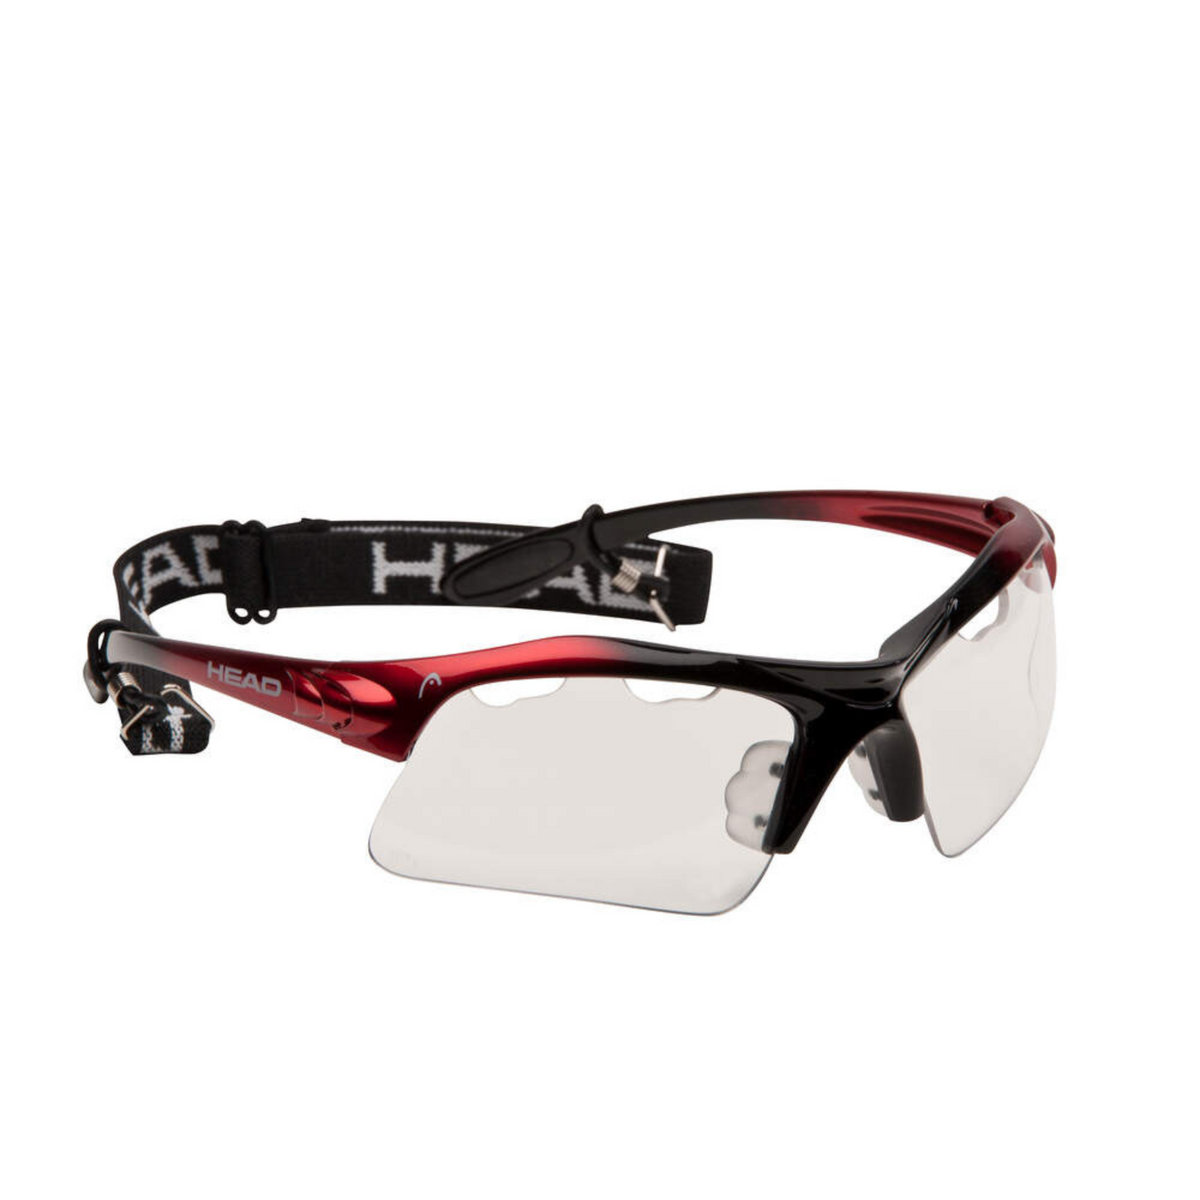 Goggles for Racquet sports such as tennis, pickleball, squash, padel, racquetball nd more!